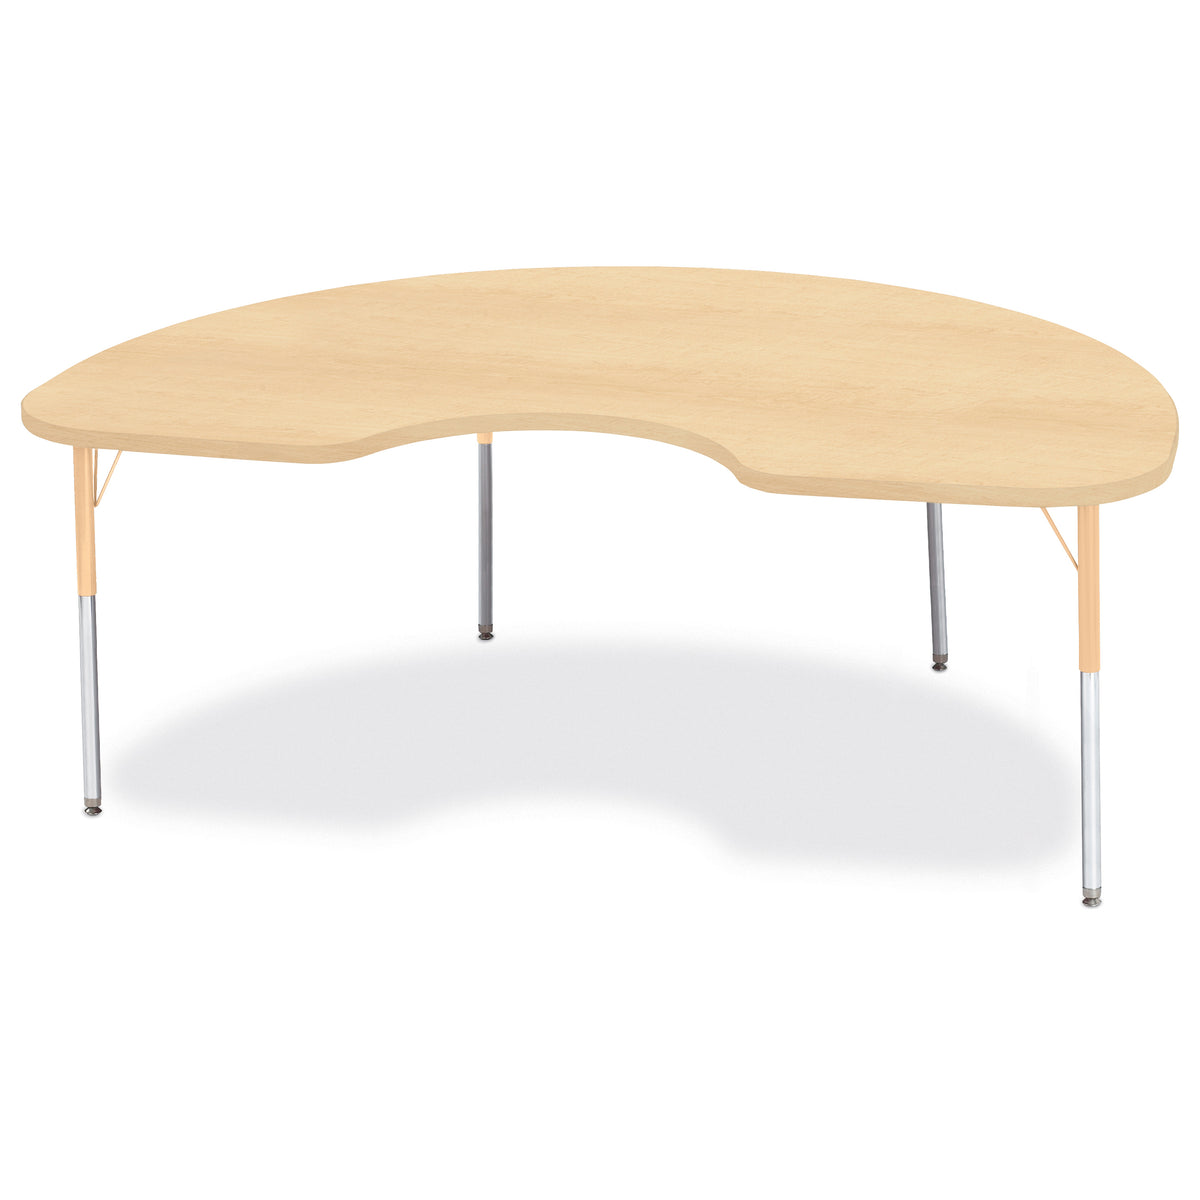 6423JCA251, Berries Kidney Activity Table - 48" X 72", A-height - Maple/Maple/Camel